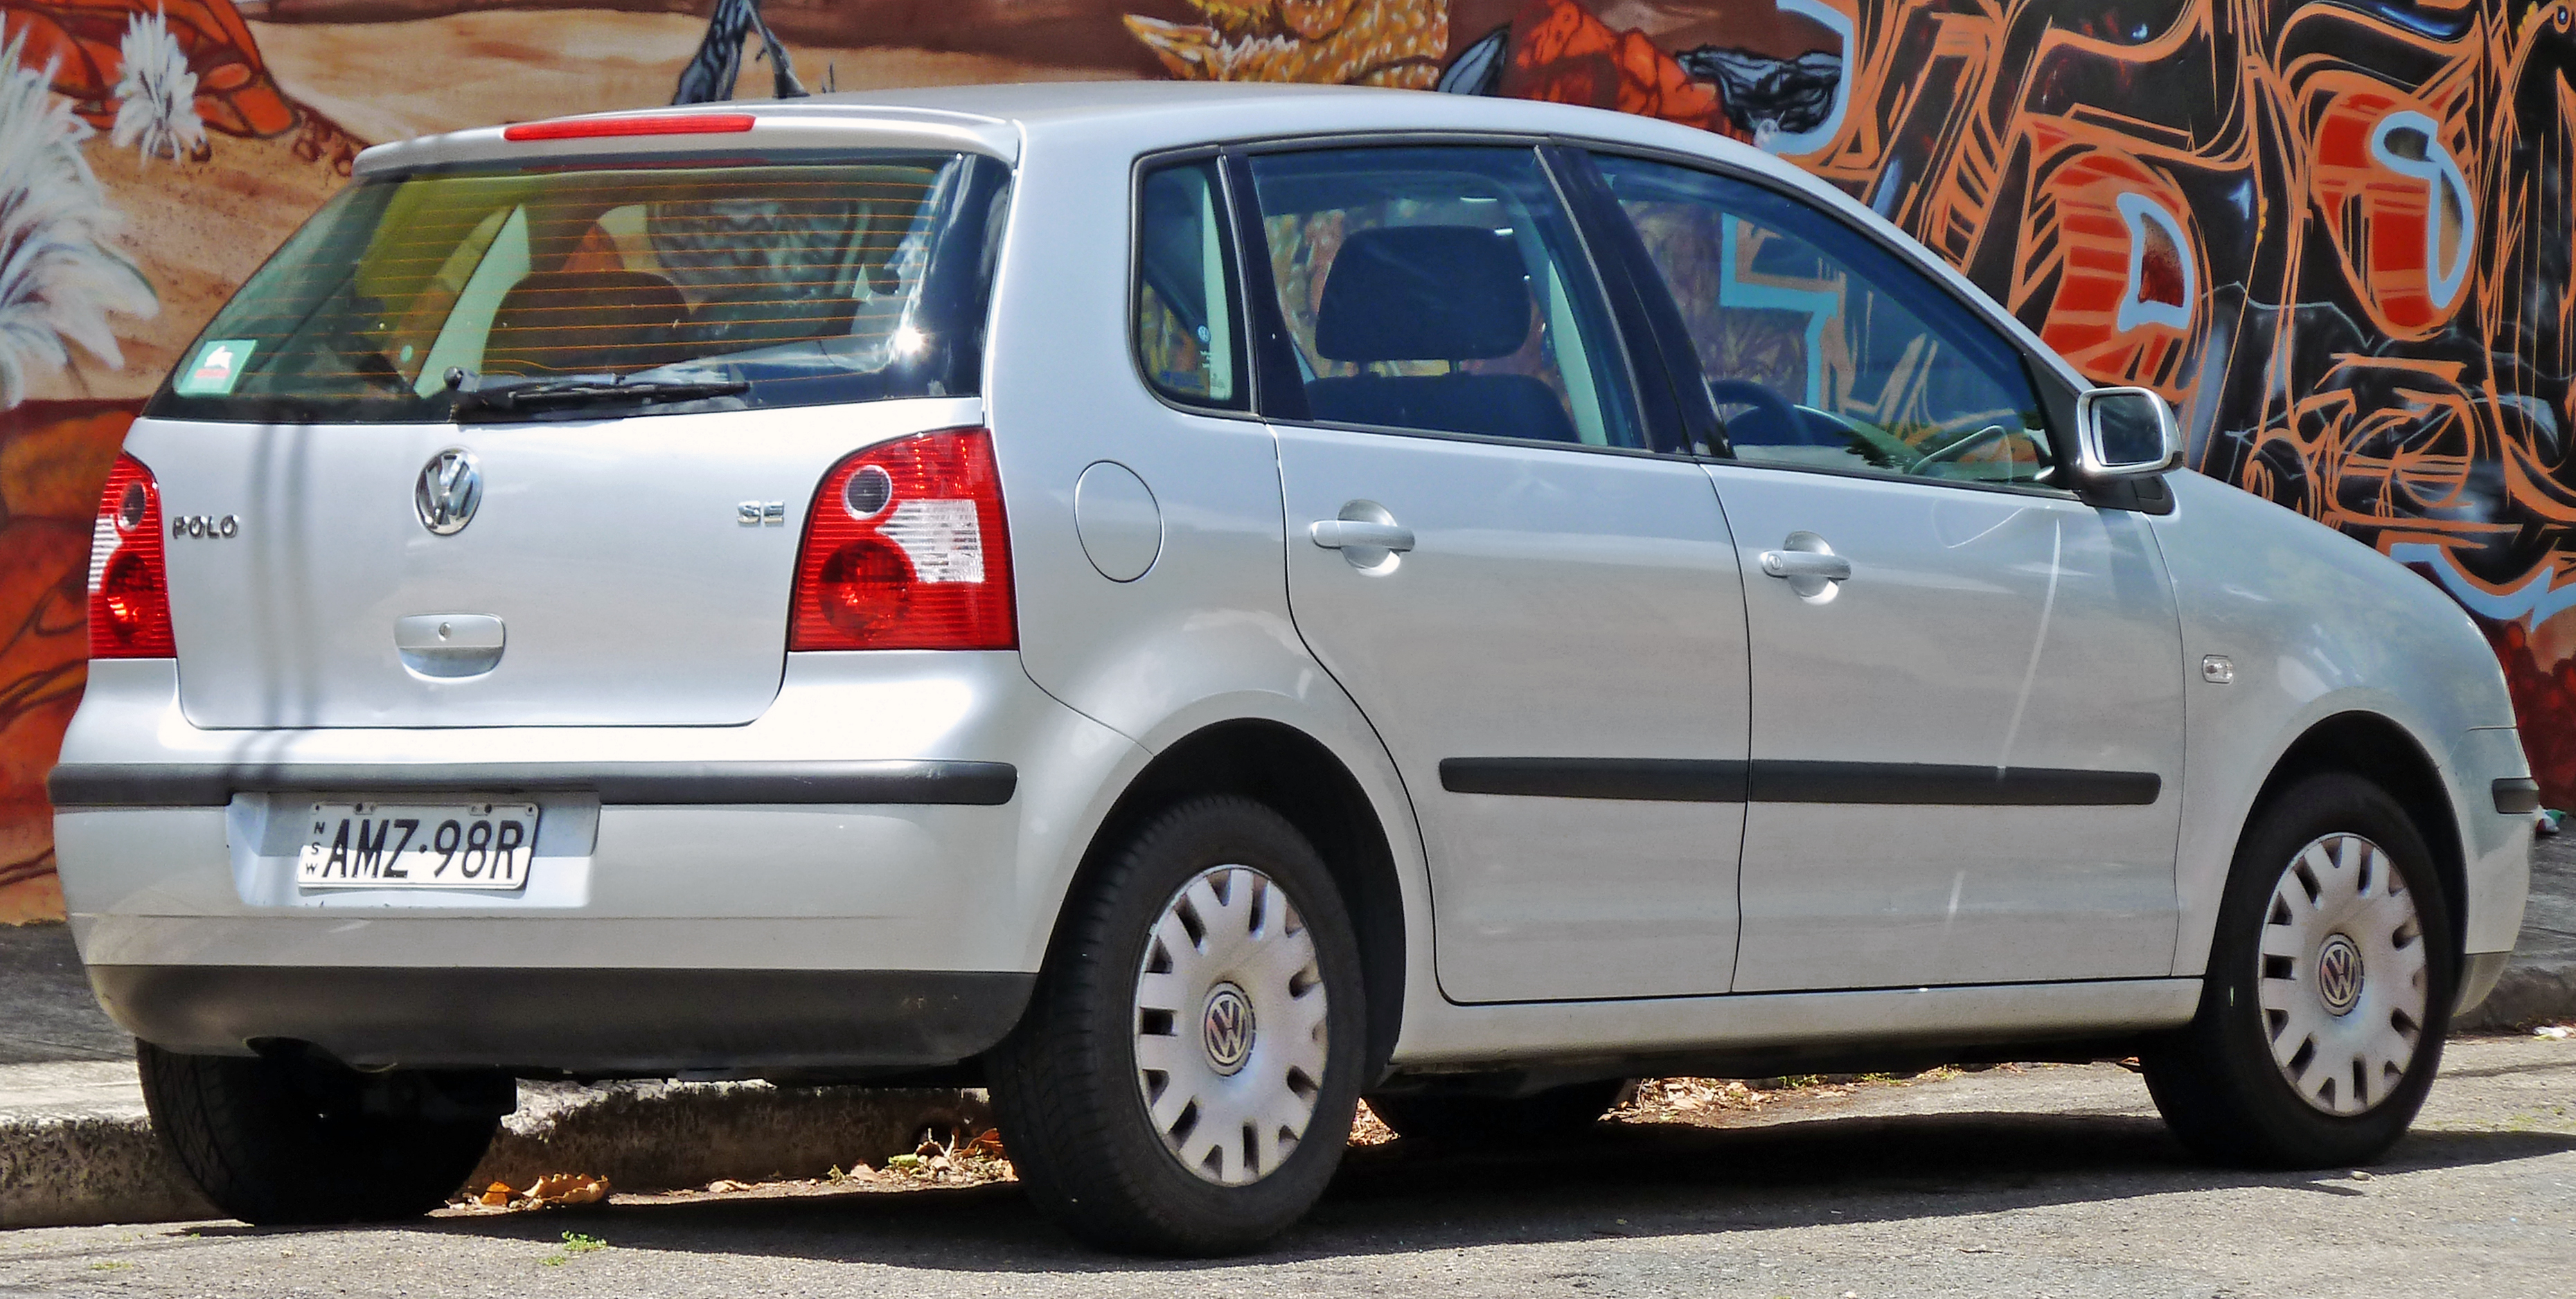 Volkswagen Polo 2002 Review, Amazing Pictures and Images